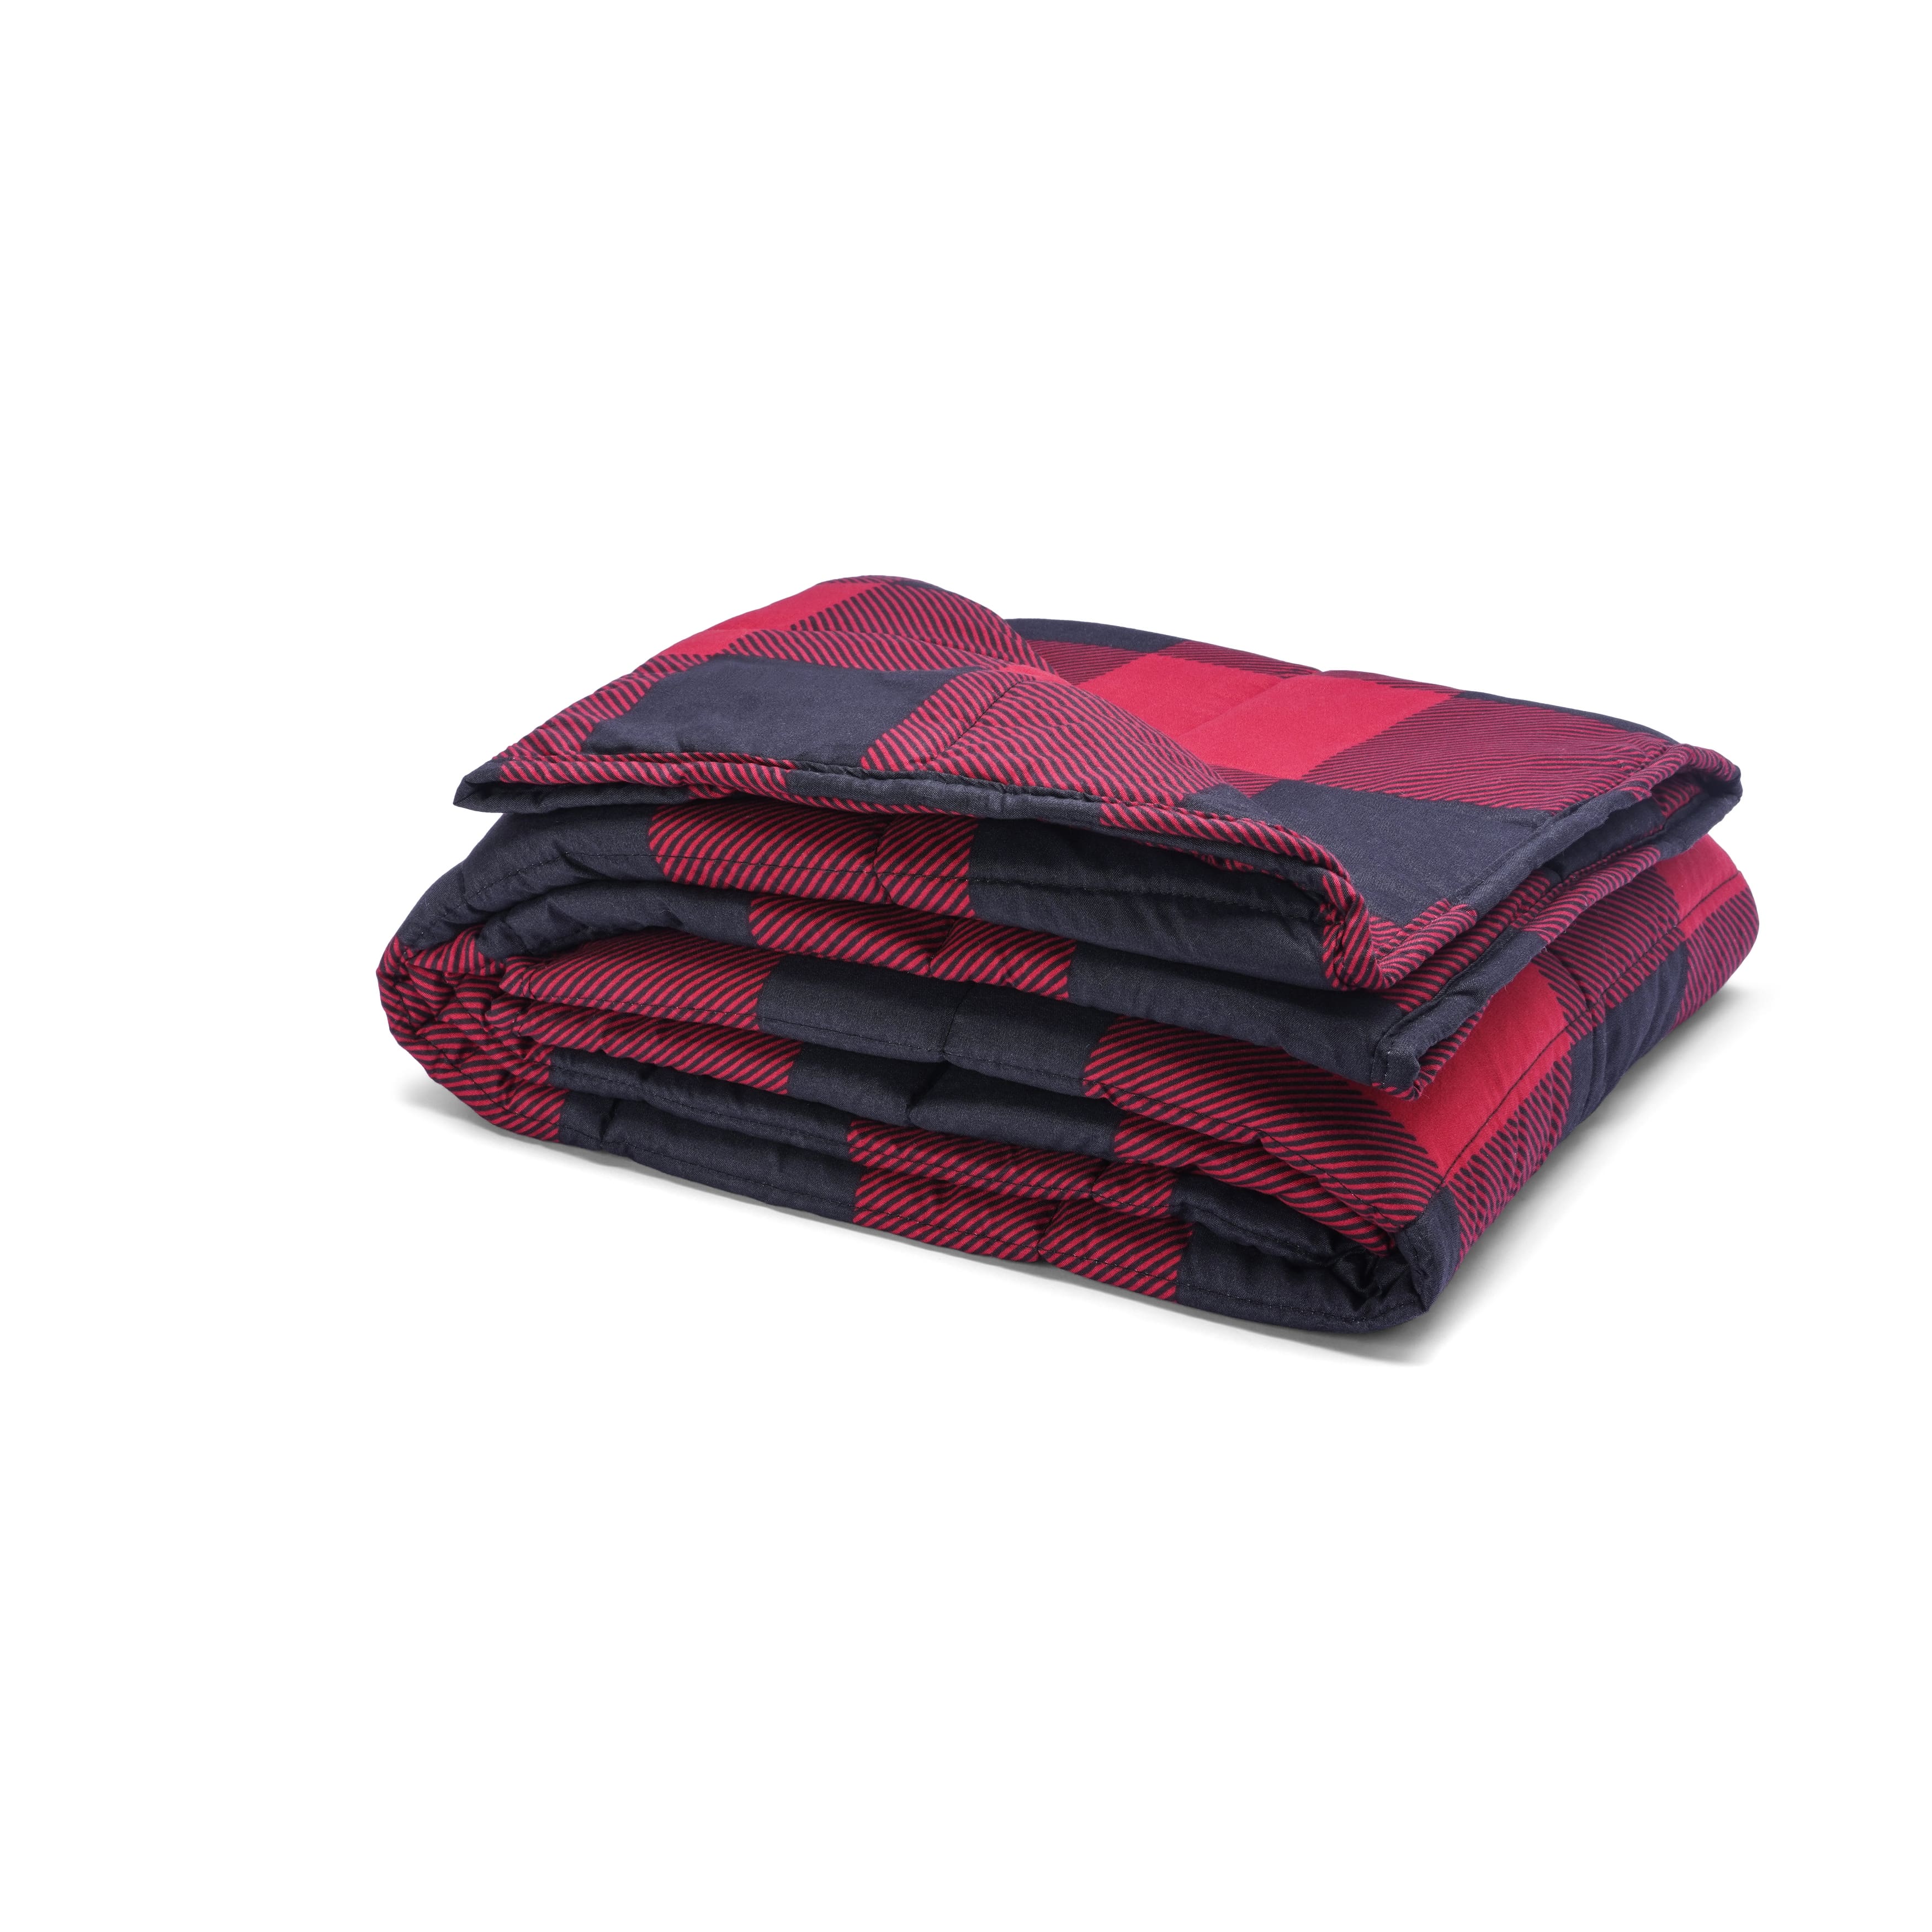 Weighted Blanket Red Buffalo Plaid - Bed Bath & Beyond - 34387644